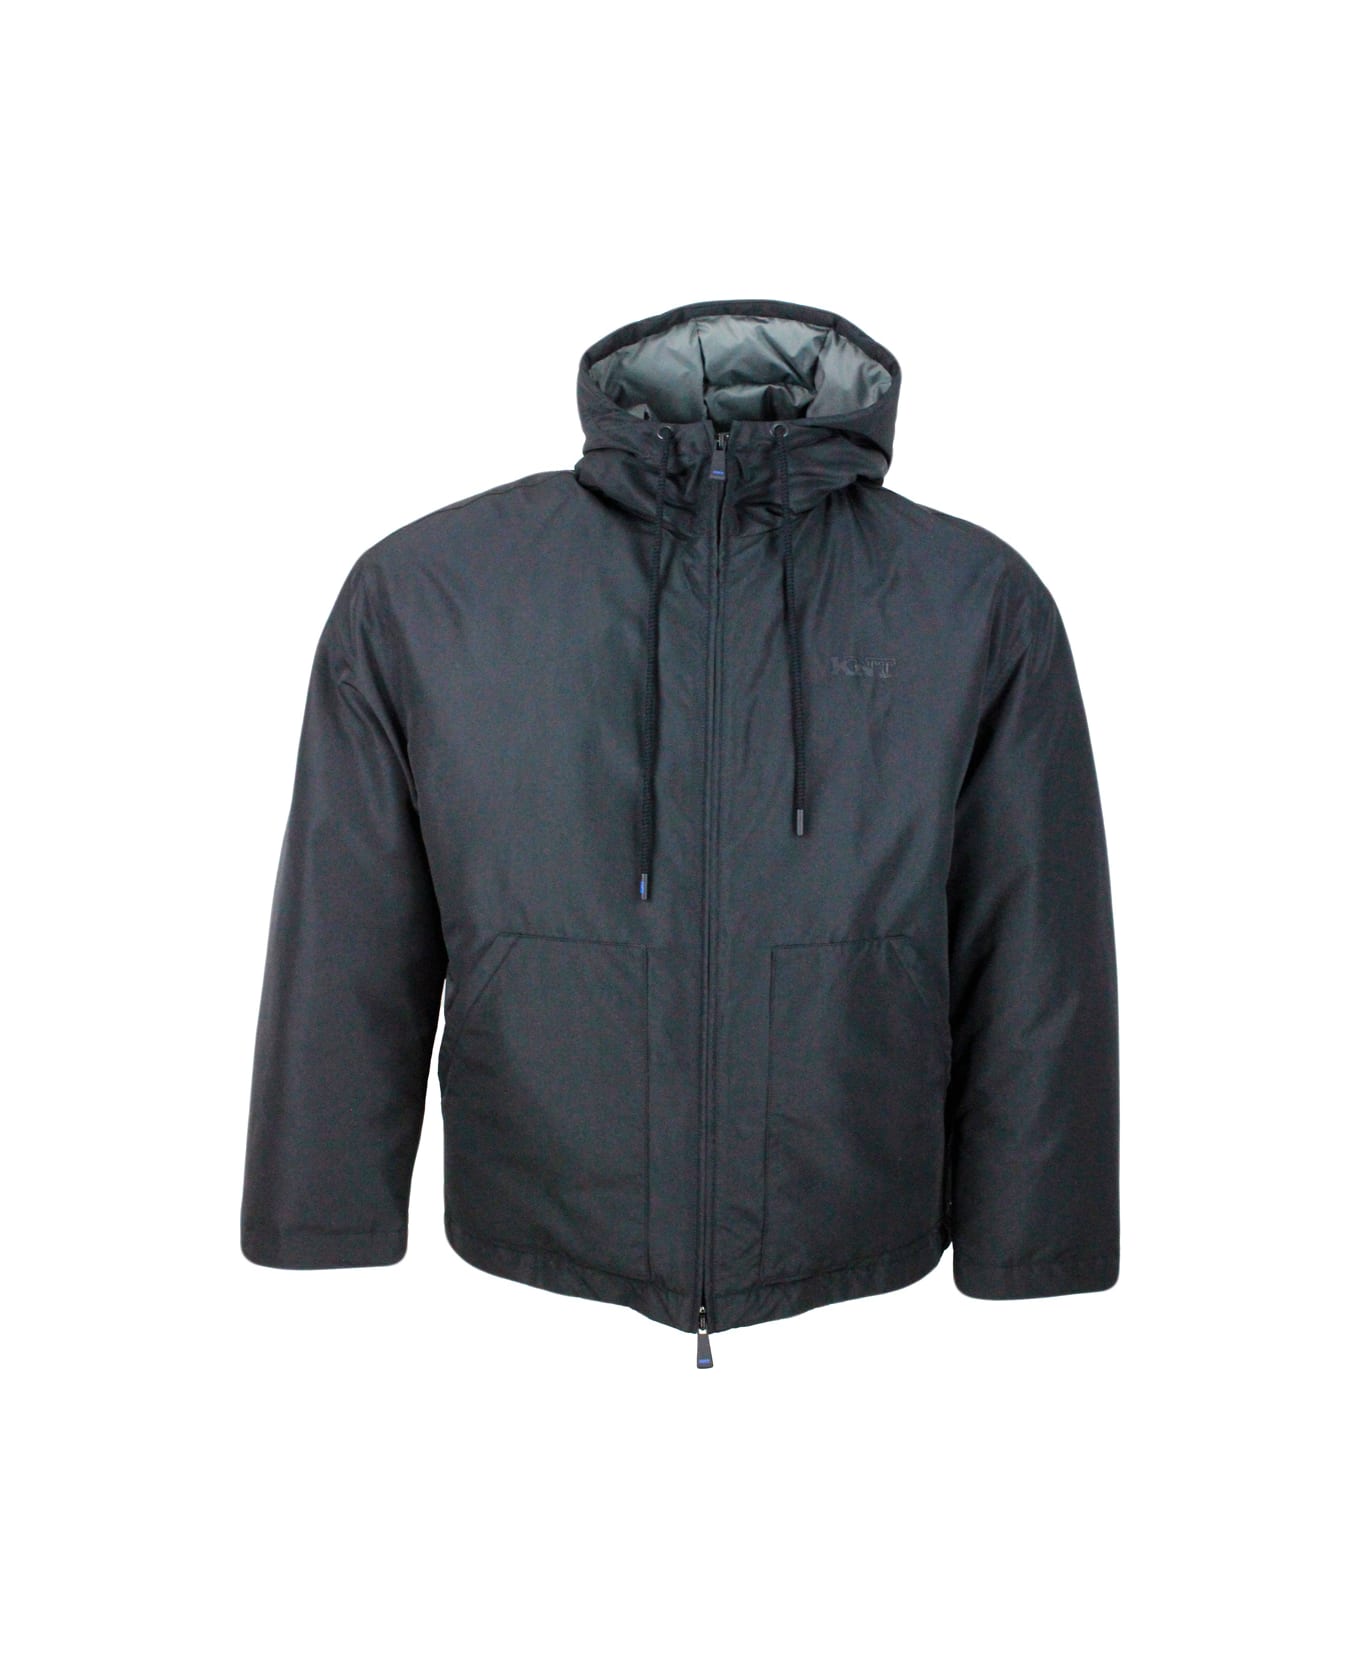 Kiton Knt Down Jacket In Technical Fabric With Hood With Drawstring With Smooth Exterior And Boudin Quilted Interior In Contrasting Color. Small Matching Lo - Black ダウンジャケット